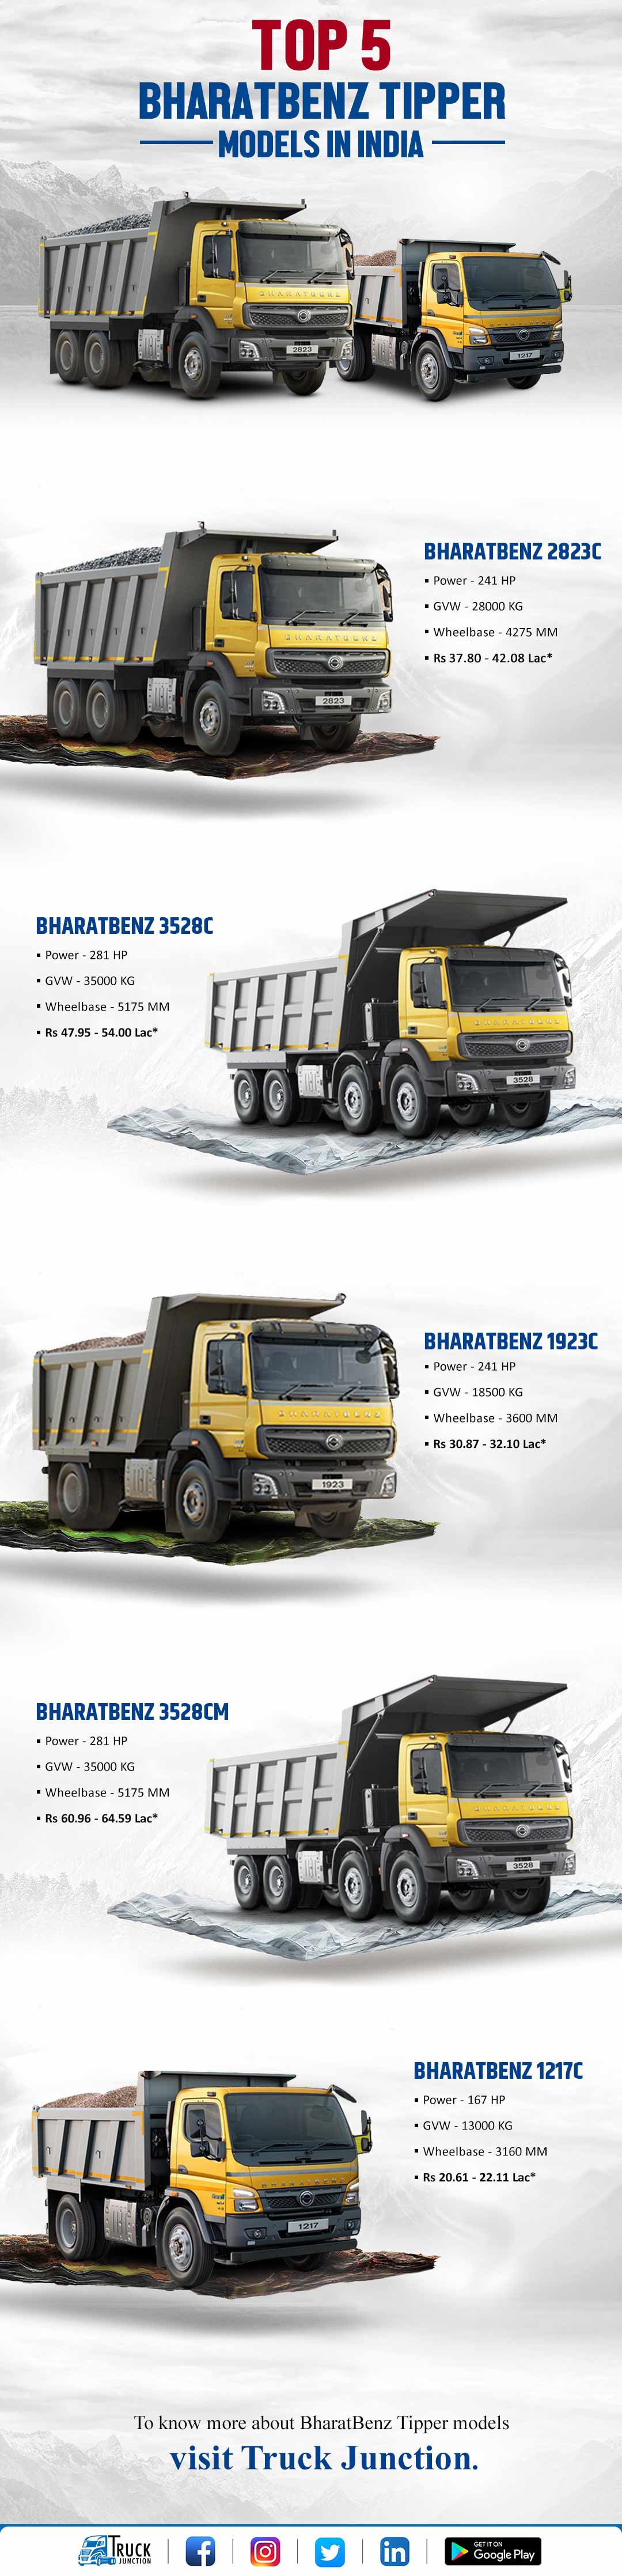 Top 5 Bharat Benz Tipper Models In India Infographic